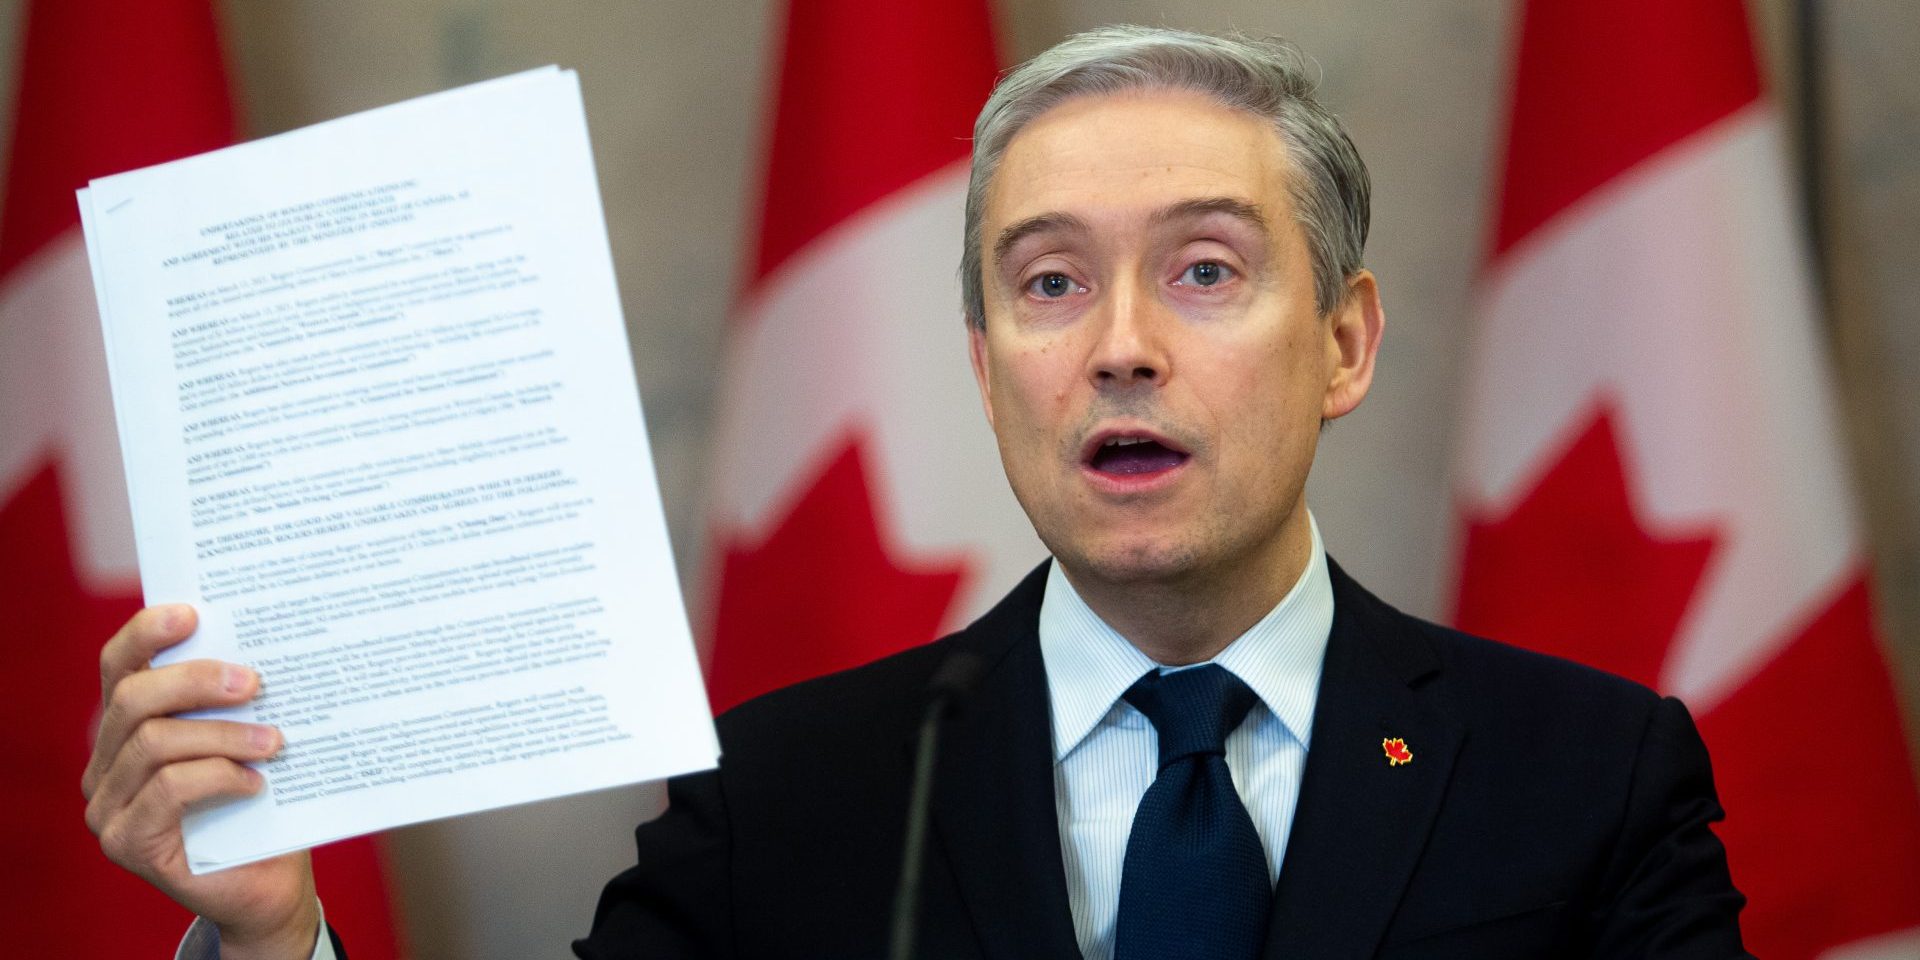 Minister of Innovation, Science and Industry François-Philippe Champagne holds up a contract between telecom providers and the federal government during a March 31, 2023, press conference in West Block to announce that the merger of Rogers and Shaw would proceed with conditions. The Hill Times photograph by Andrew Meade